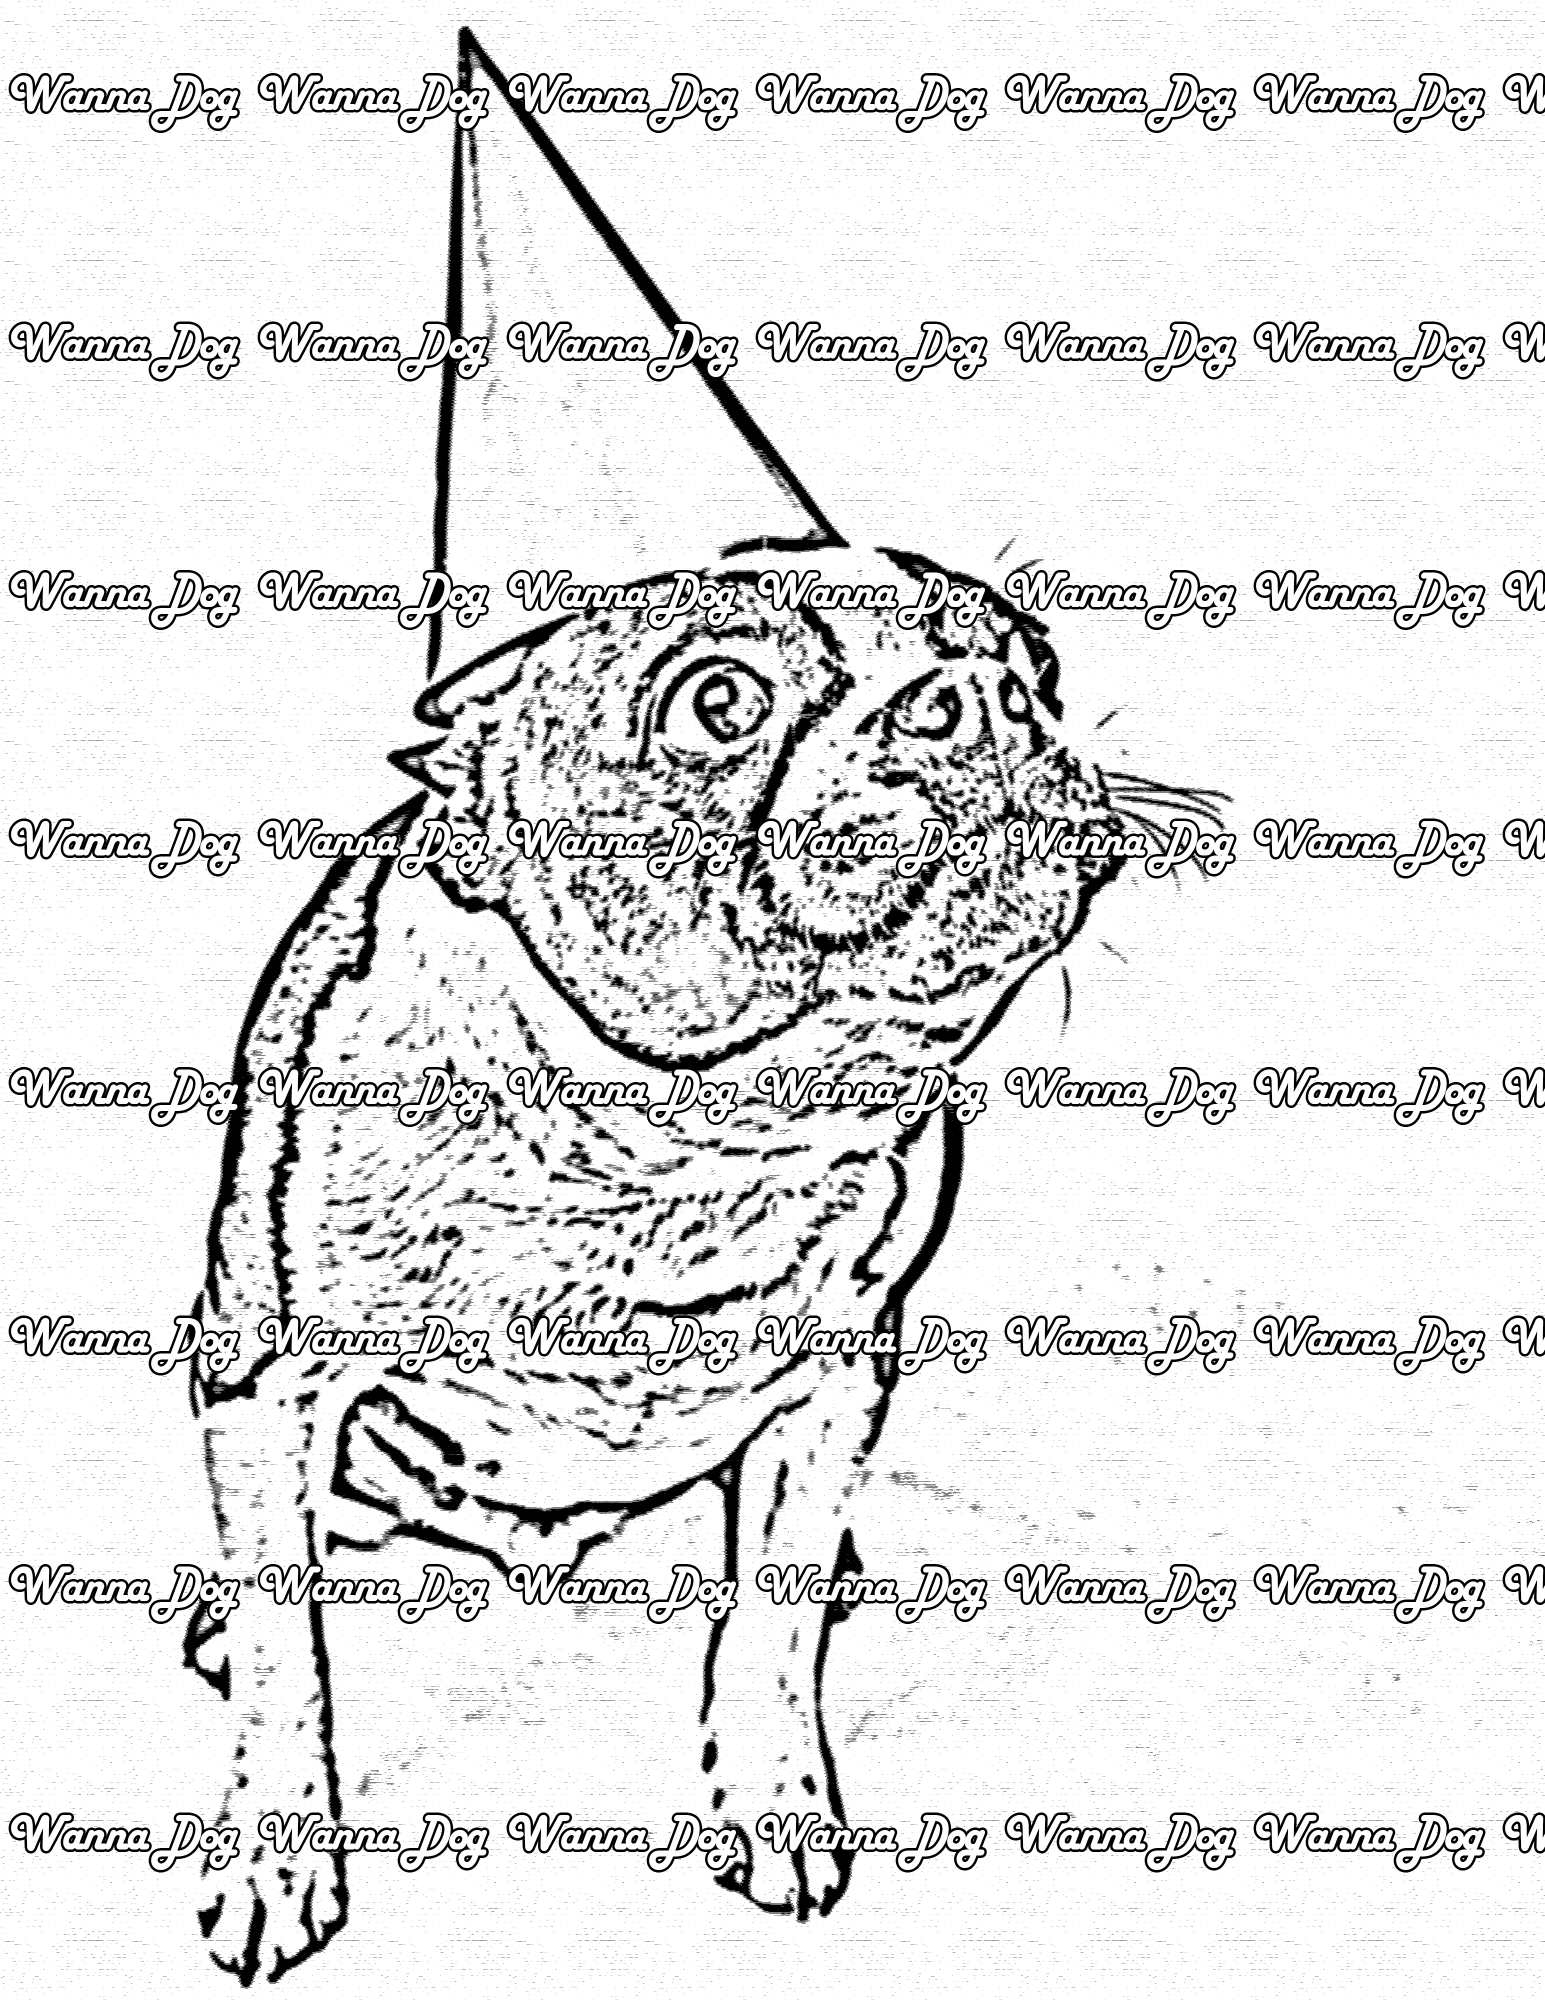 Boston Terrier Coloring Page of a Boston Terrier wearing a large hat